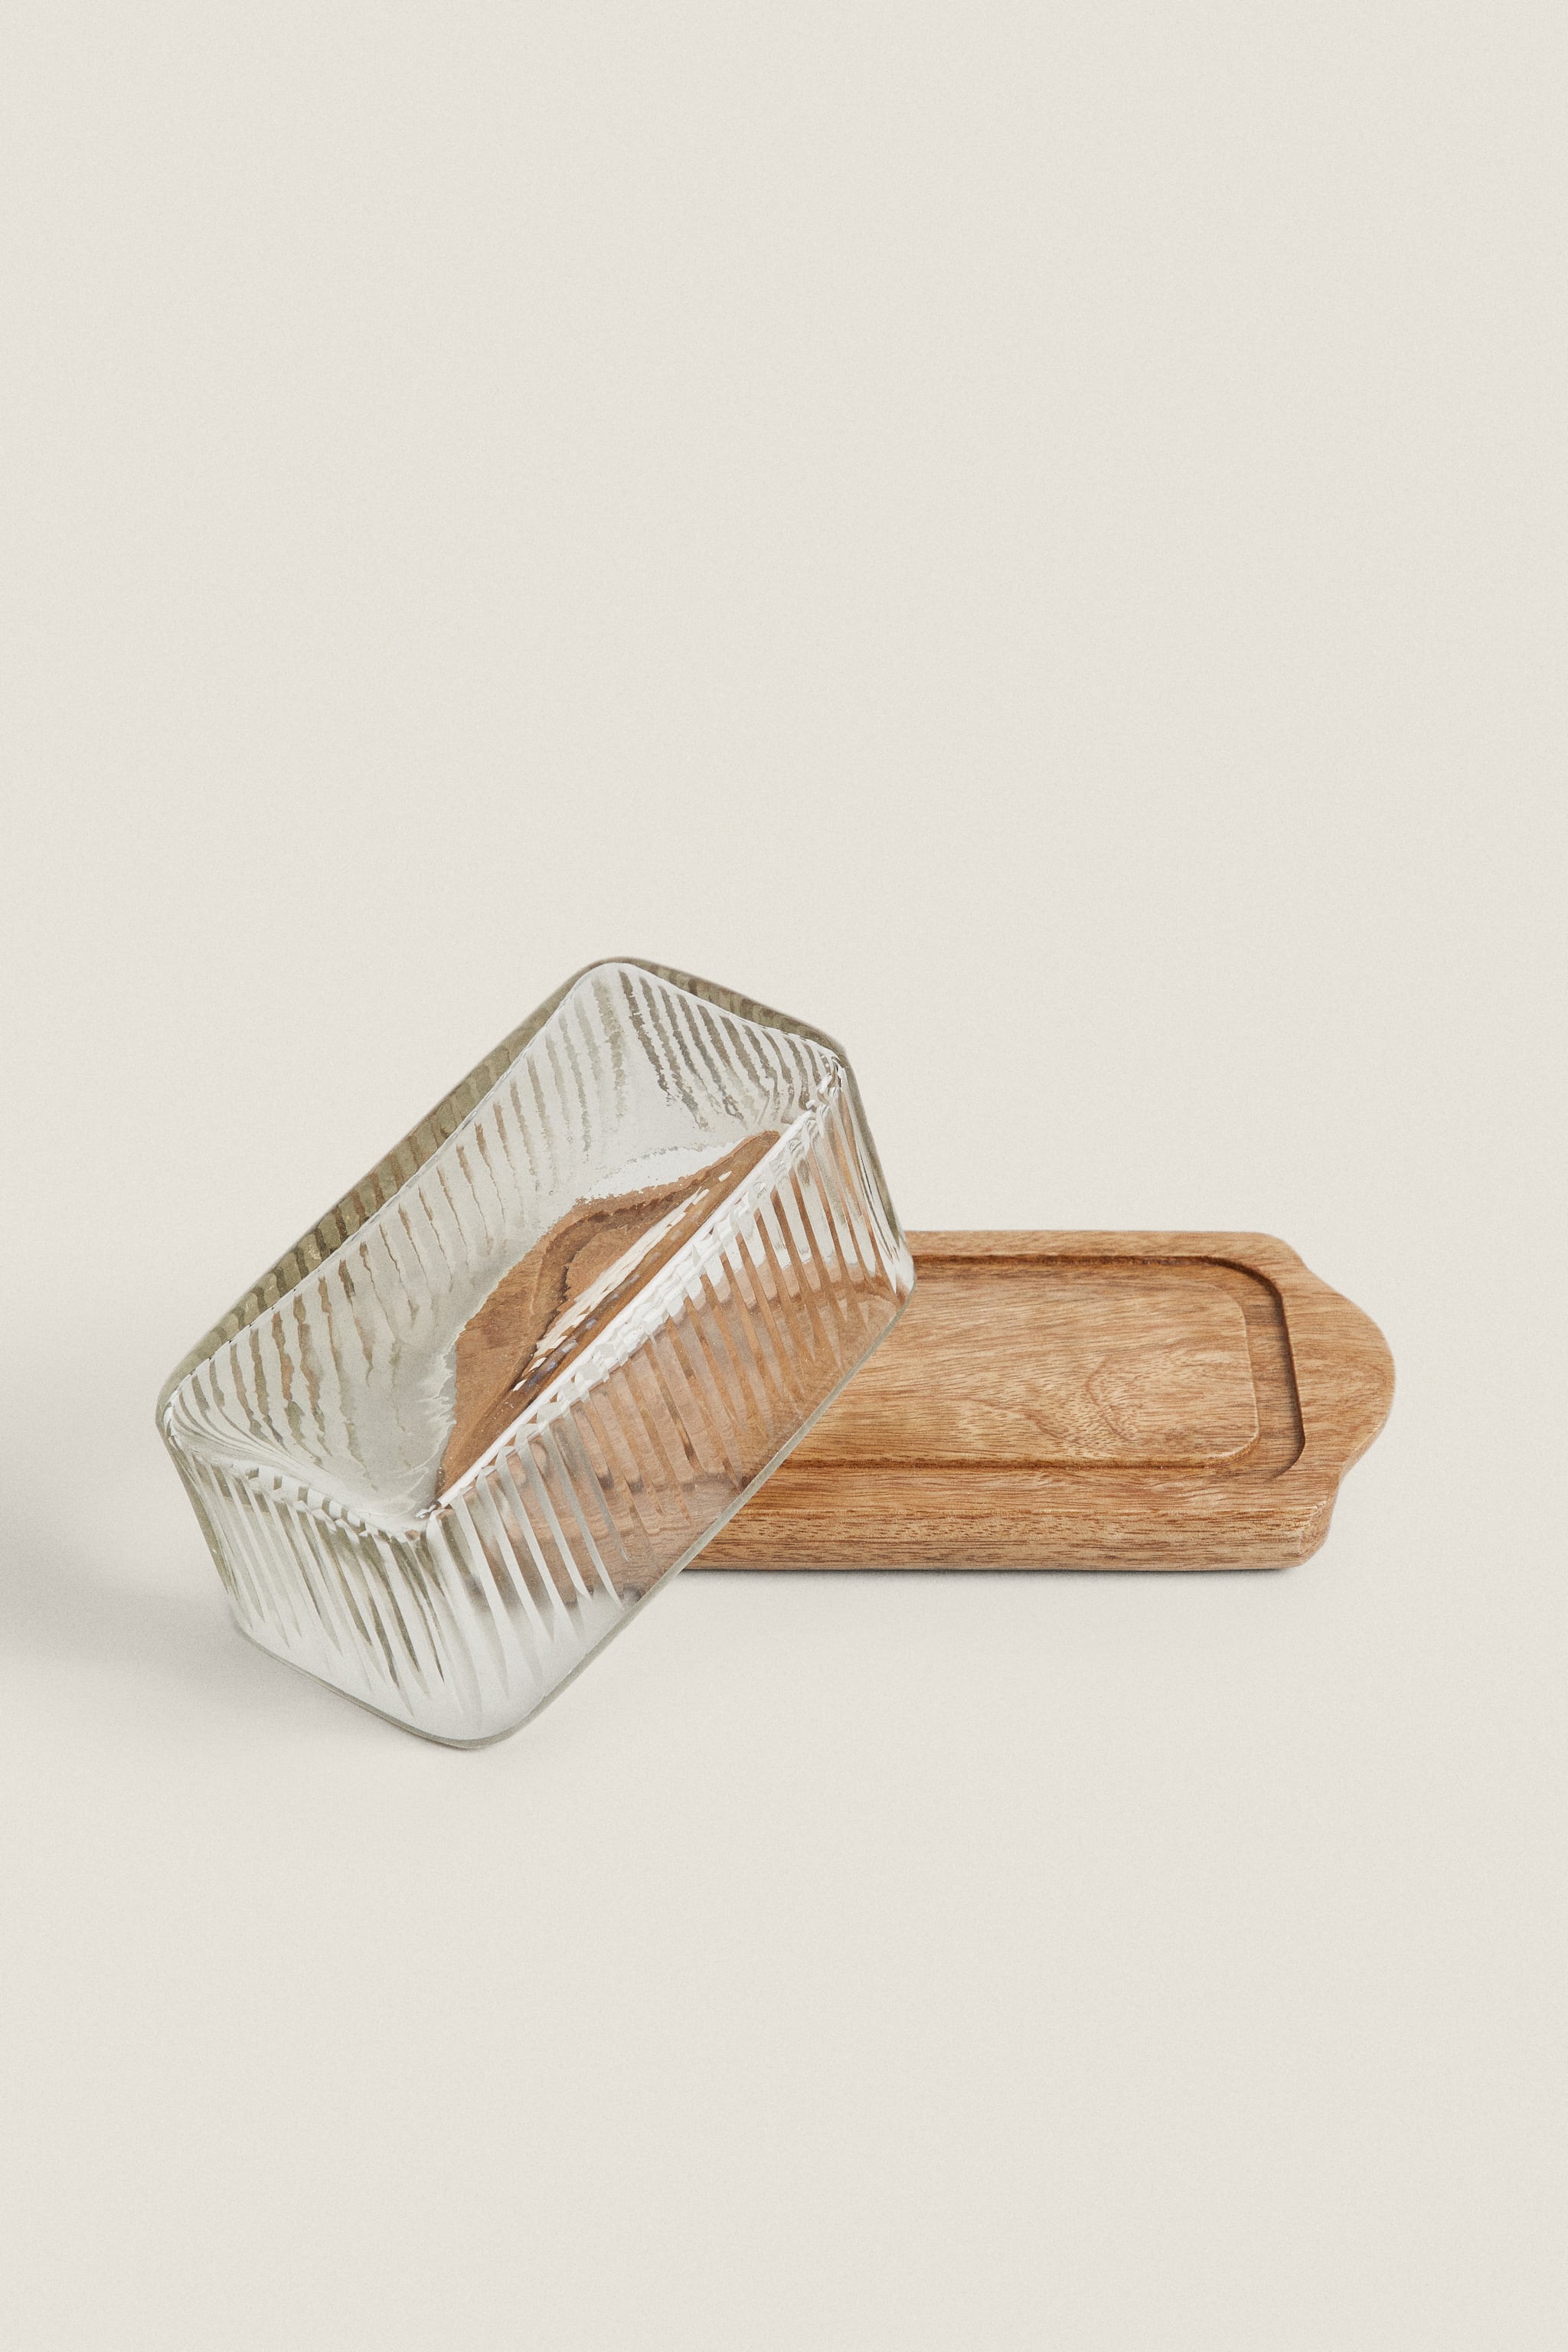 WOOD AND GLASS BUTTER DISH